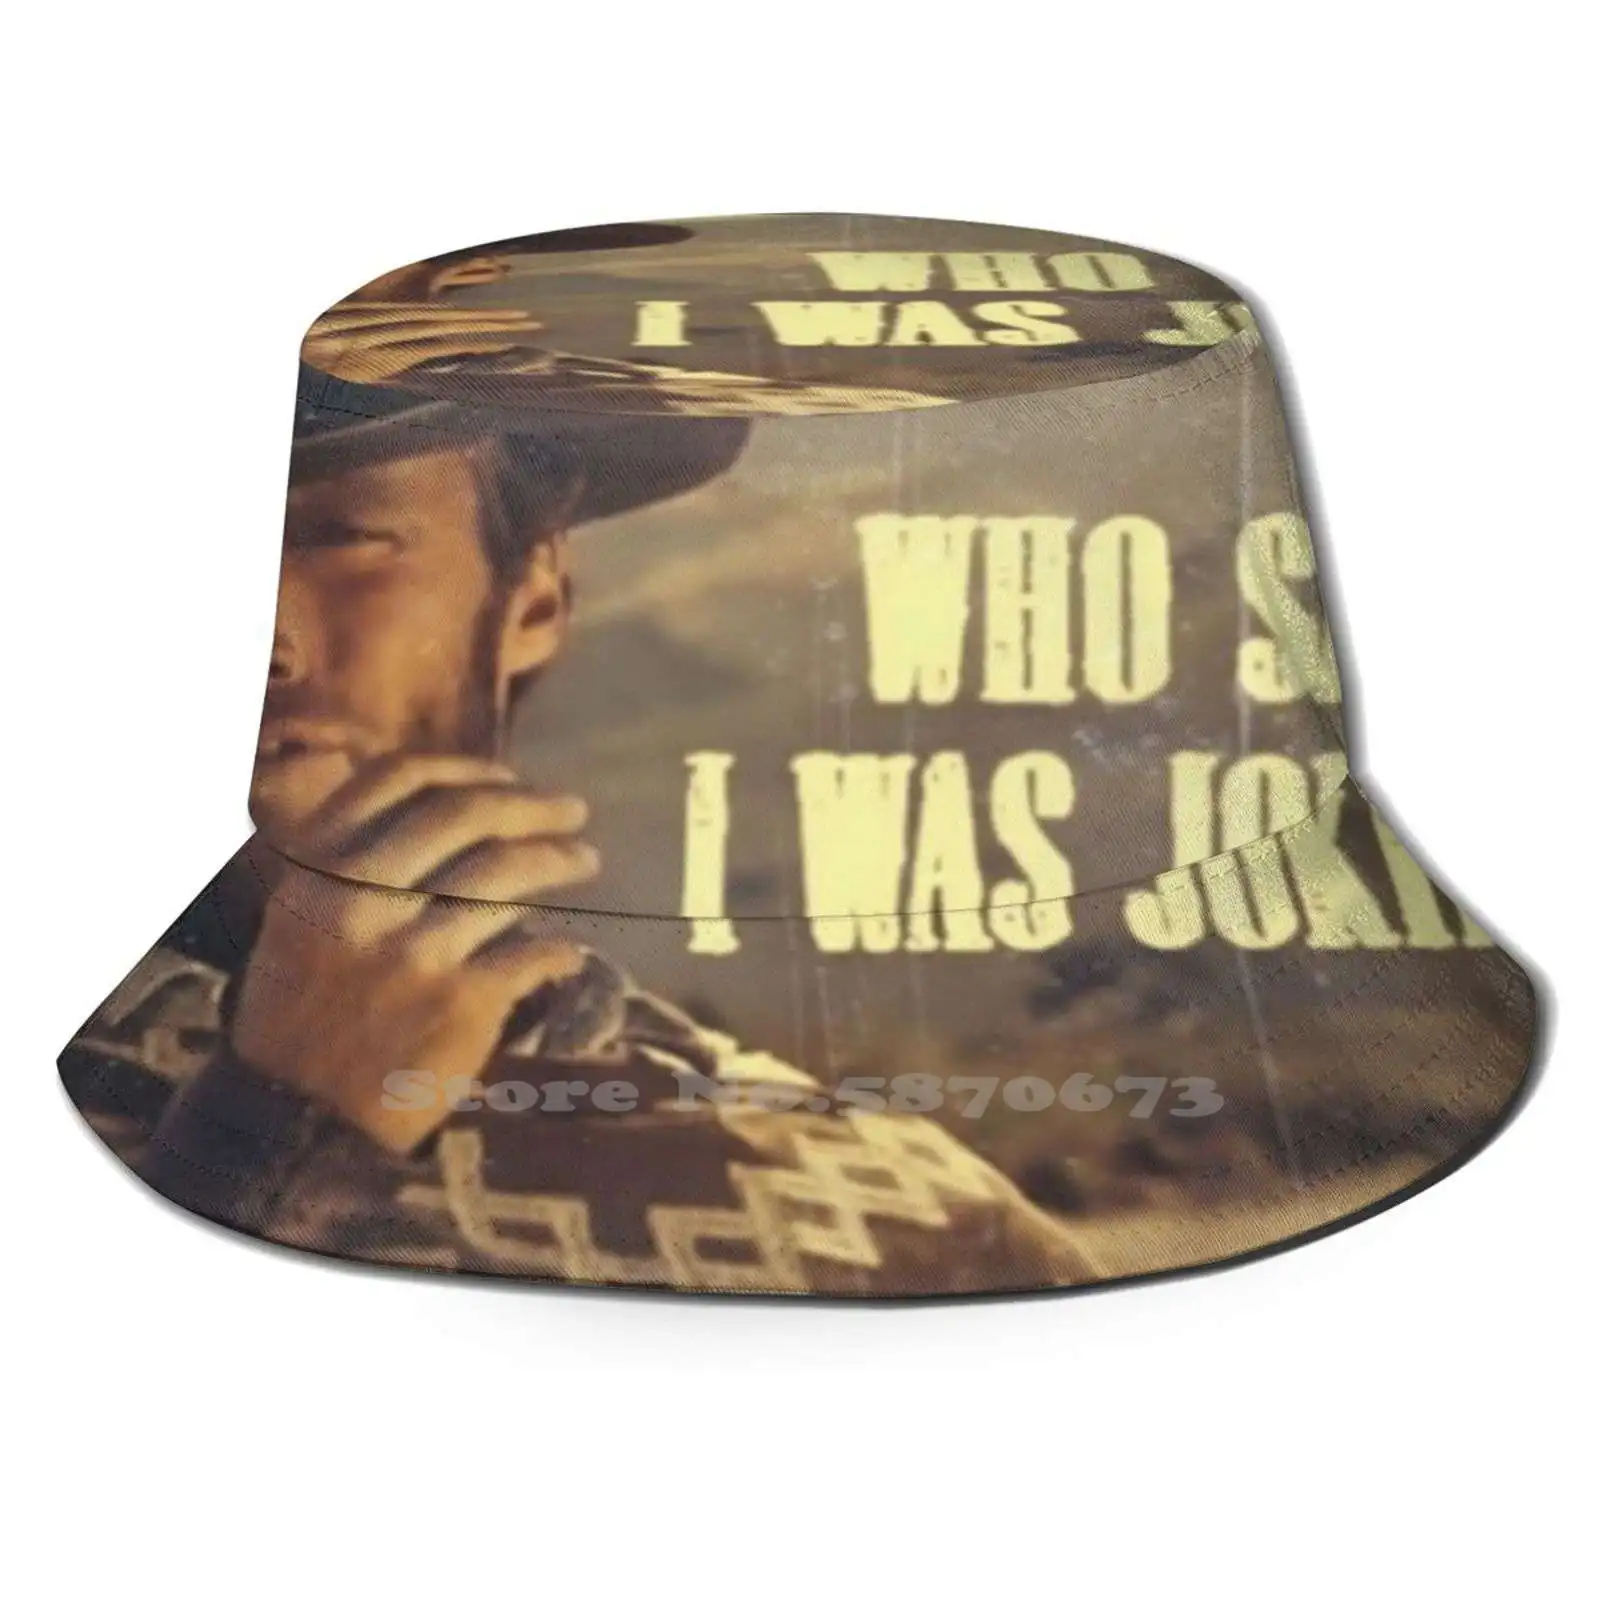 

Clint Eastwood - Who Said I Was Joking Pattern Hats Outdoor Hat Sun Cap Clint Eastwood Movie Movies Film Classic For A Few